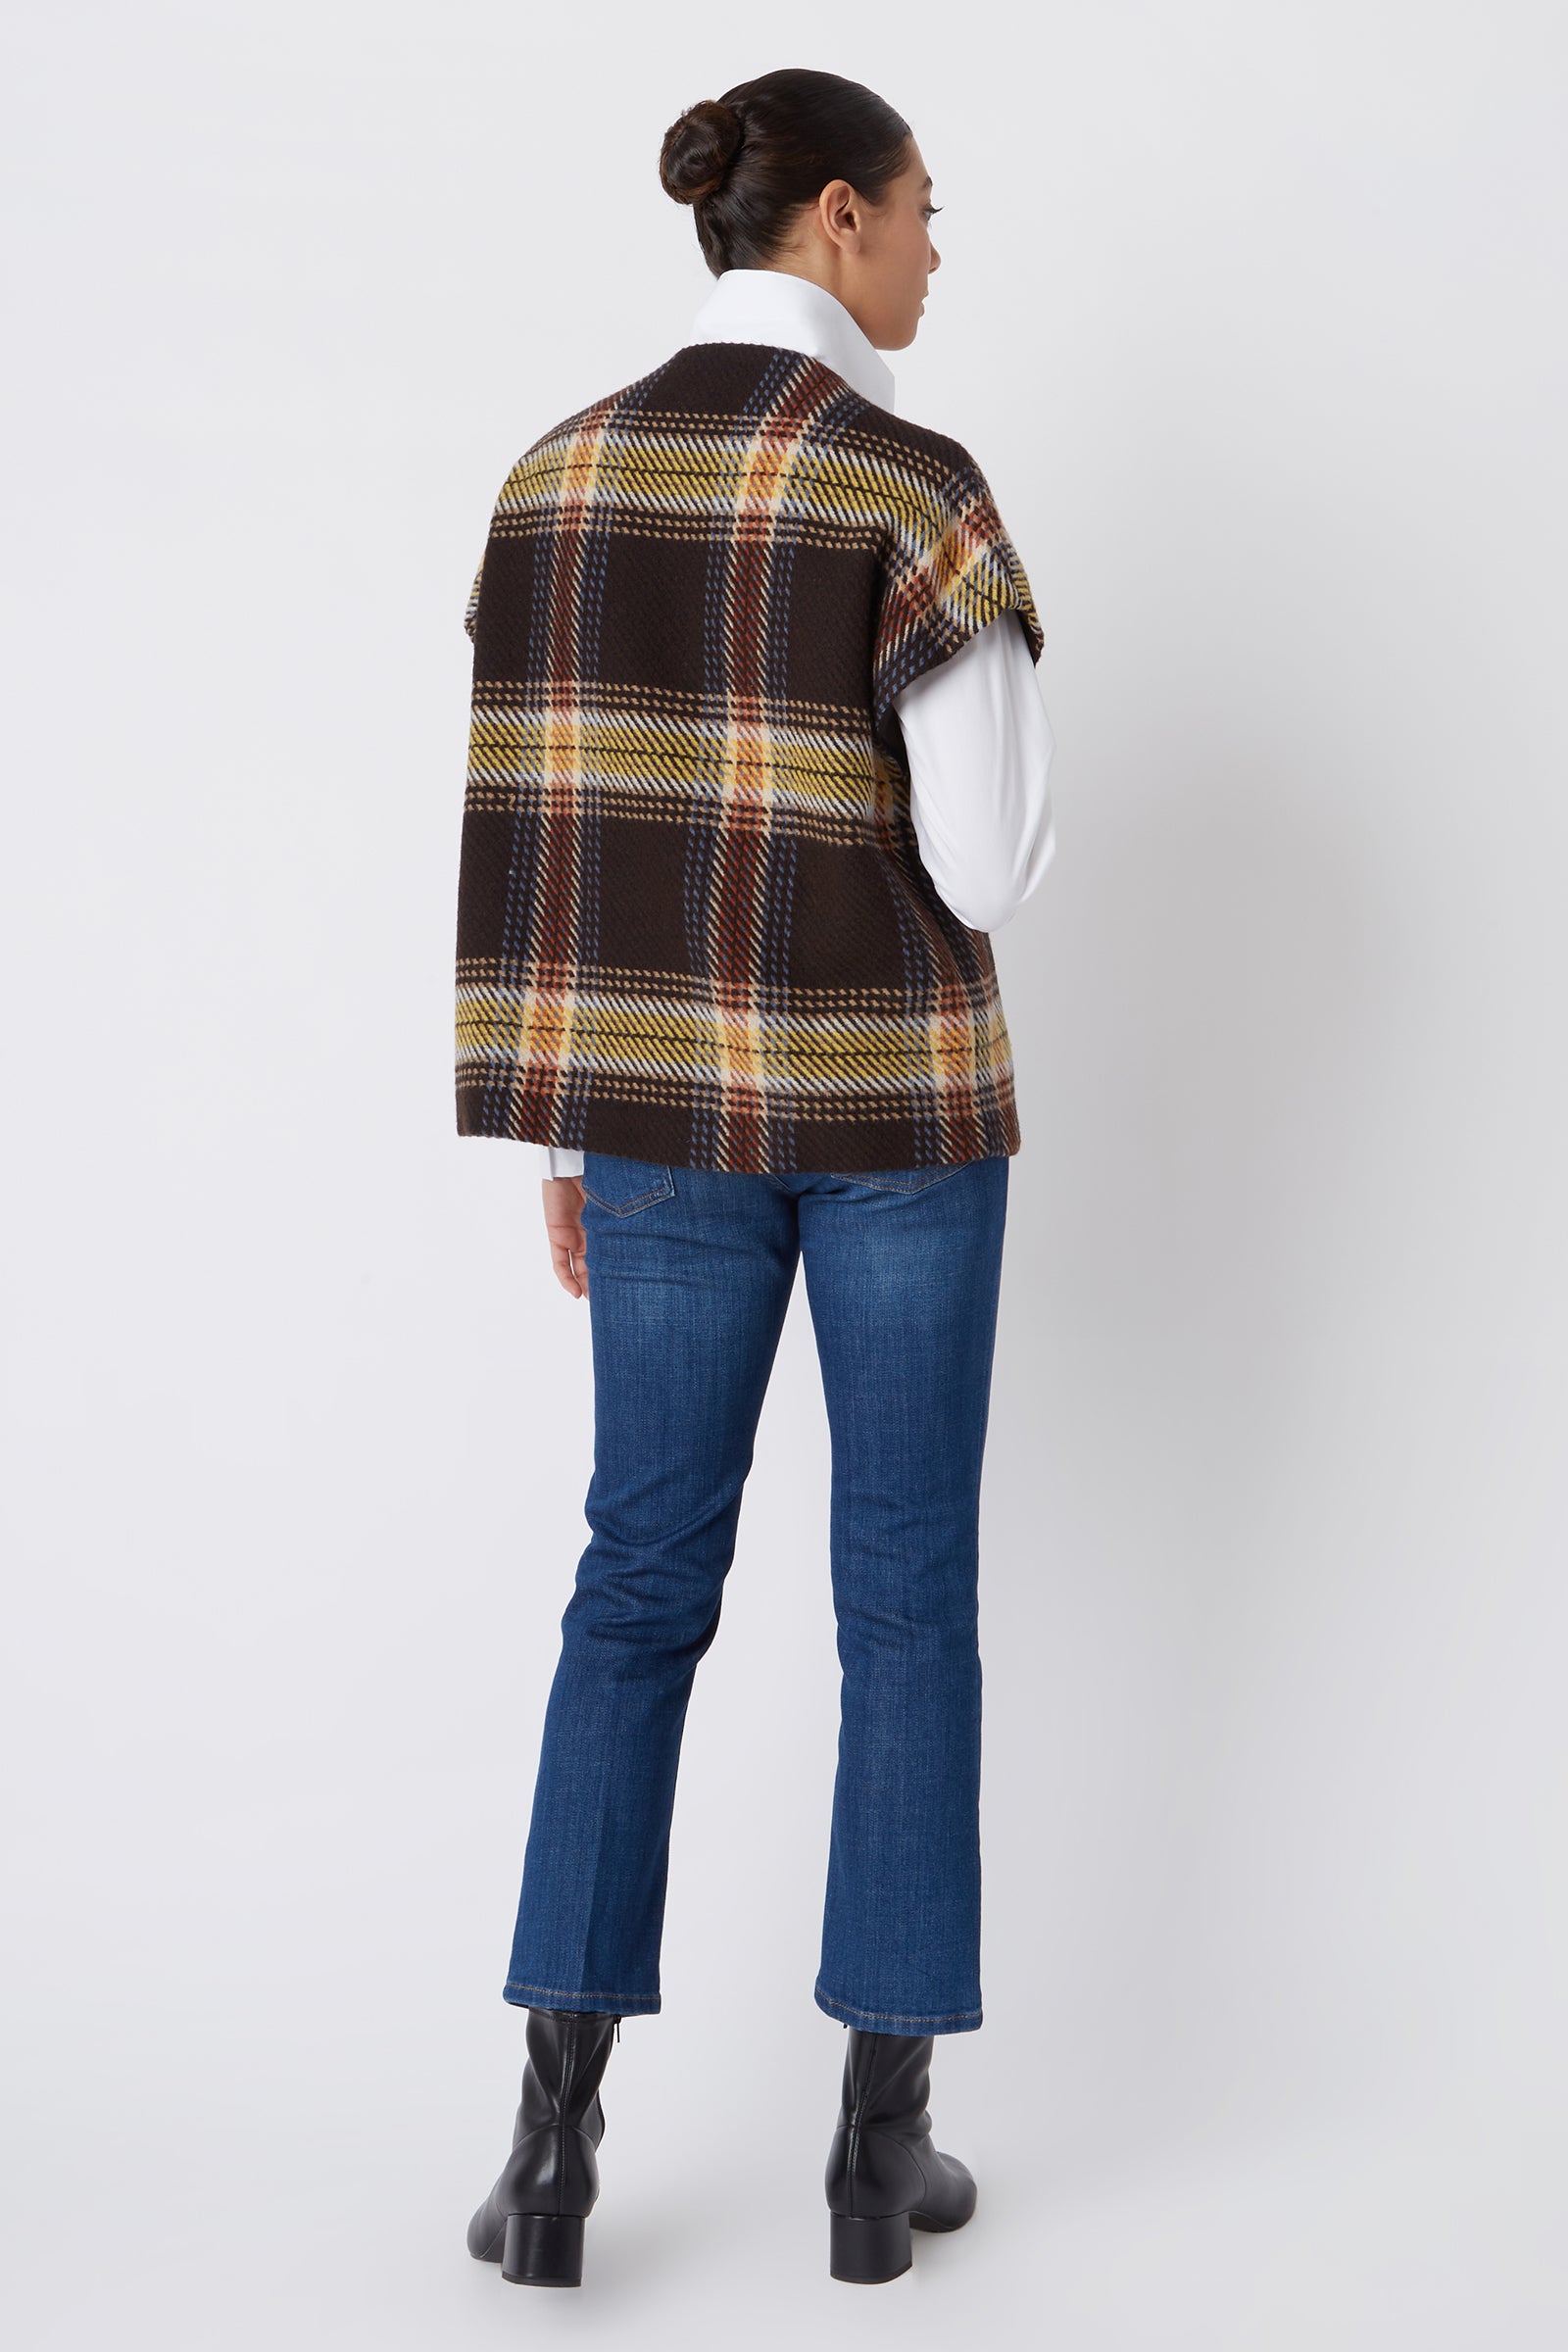 Kal Rieman Mina Zip Vest in Bold Plaid on Model Touching Collar Cropped Front View